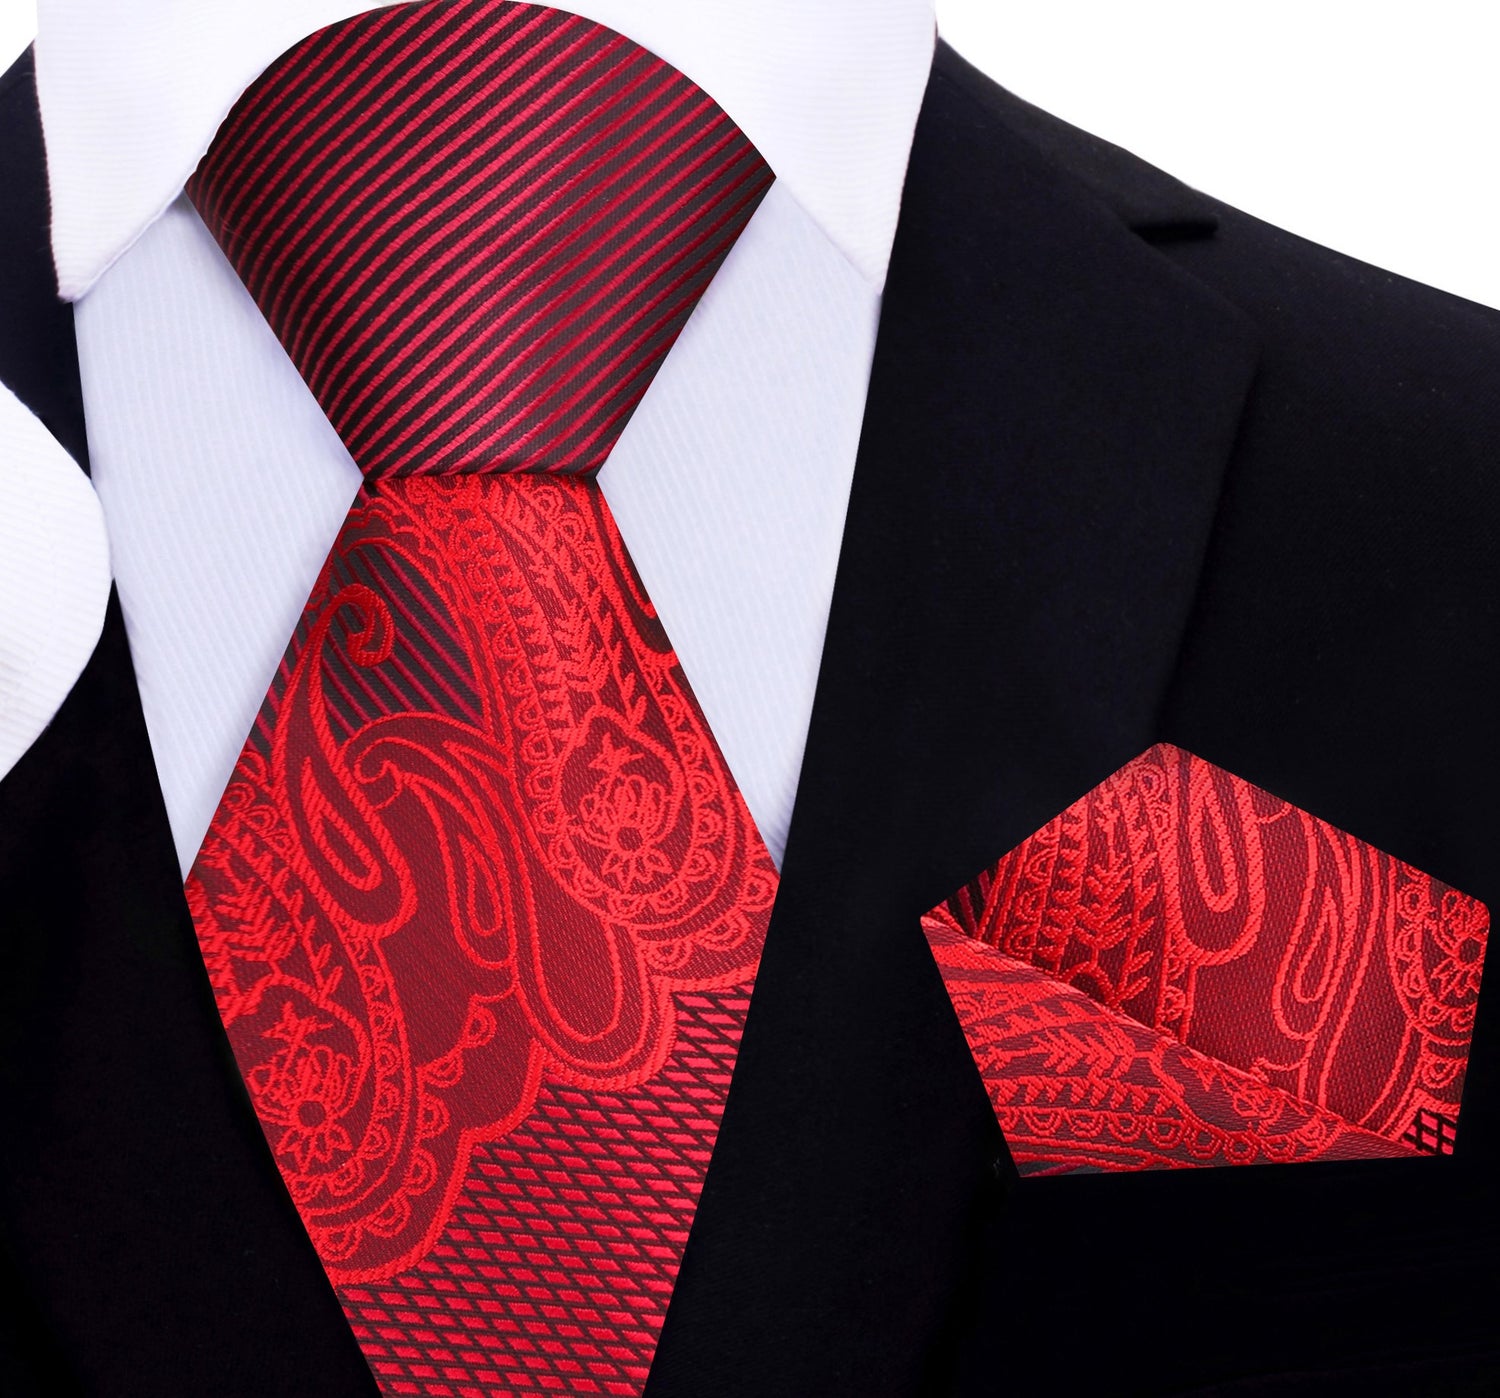 Coach PRIME Deion Sanders Shades of Red Paisley Tie and Pocket Square